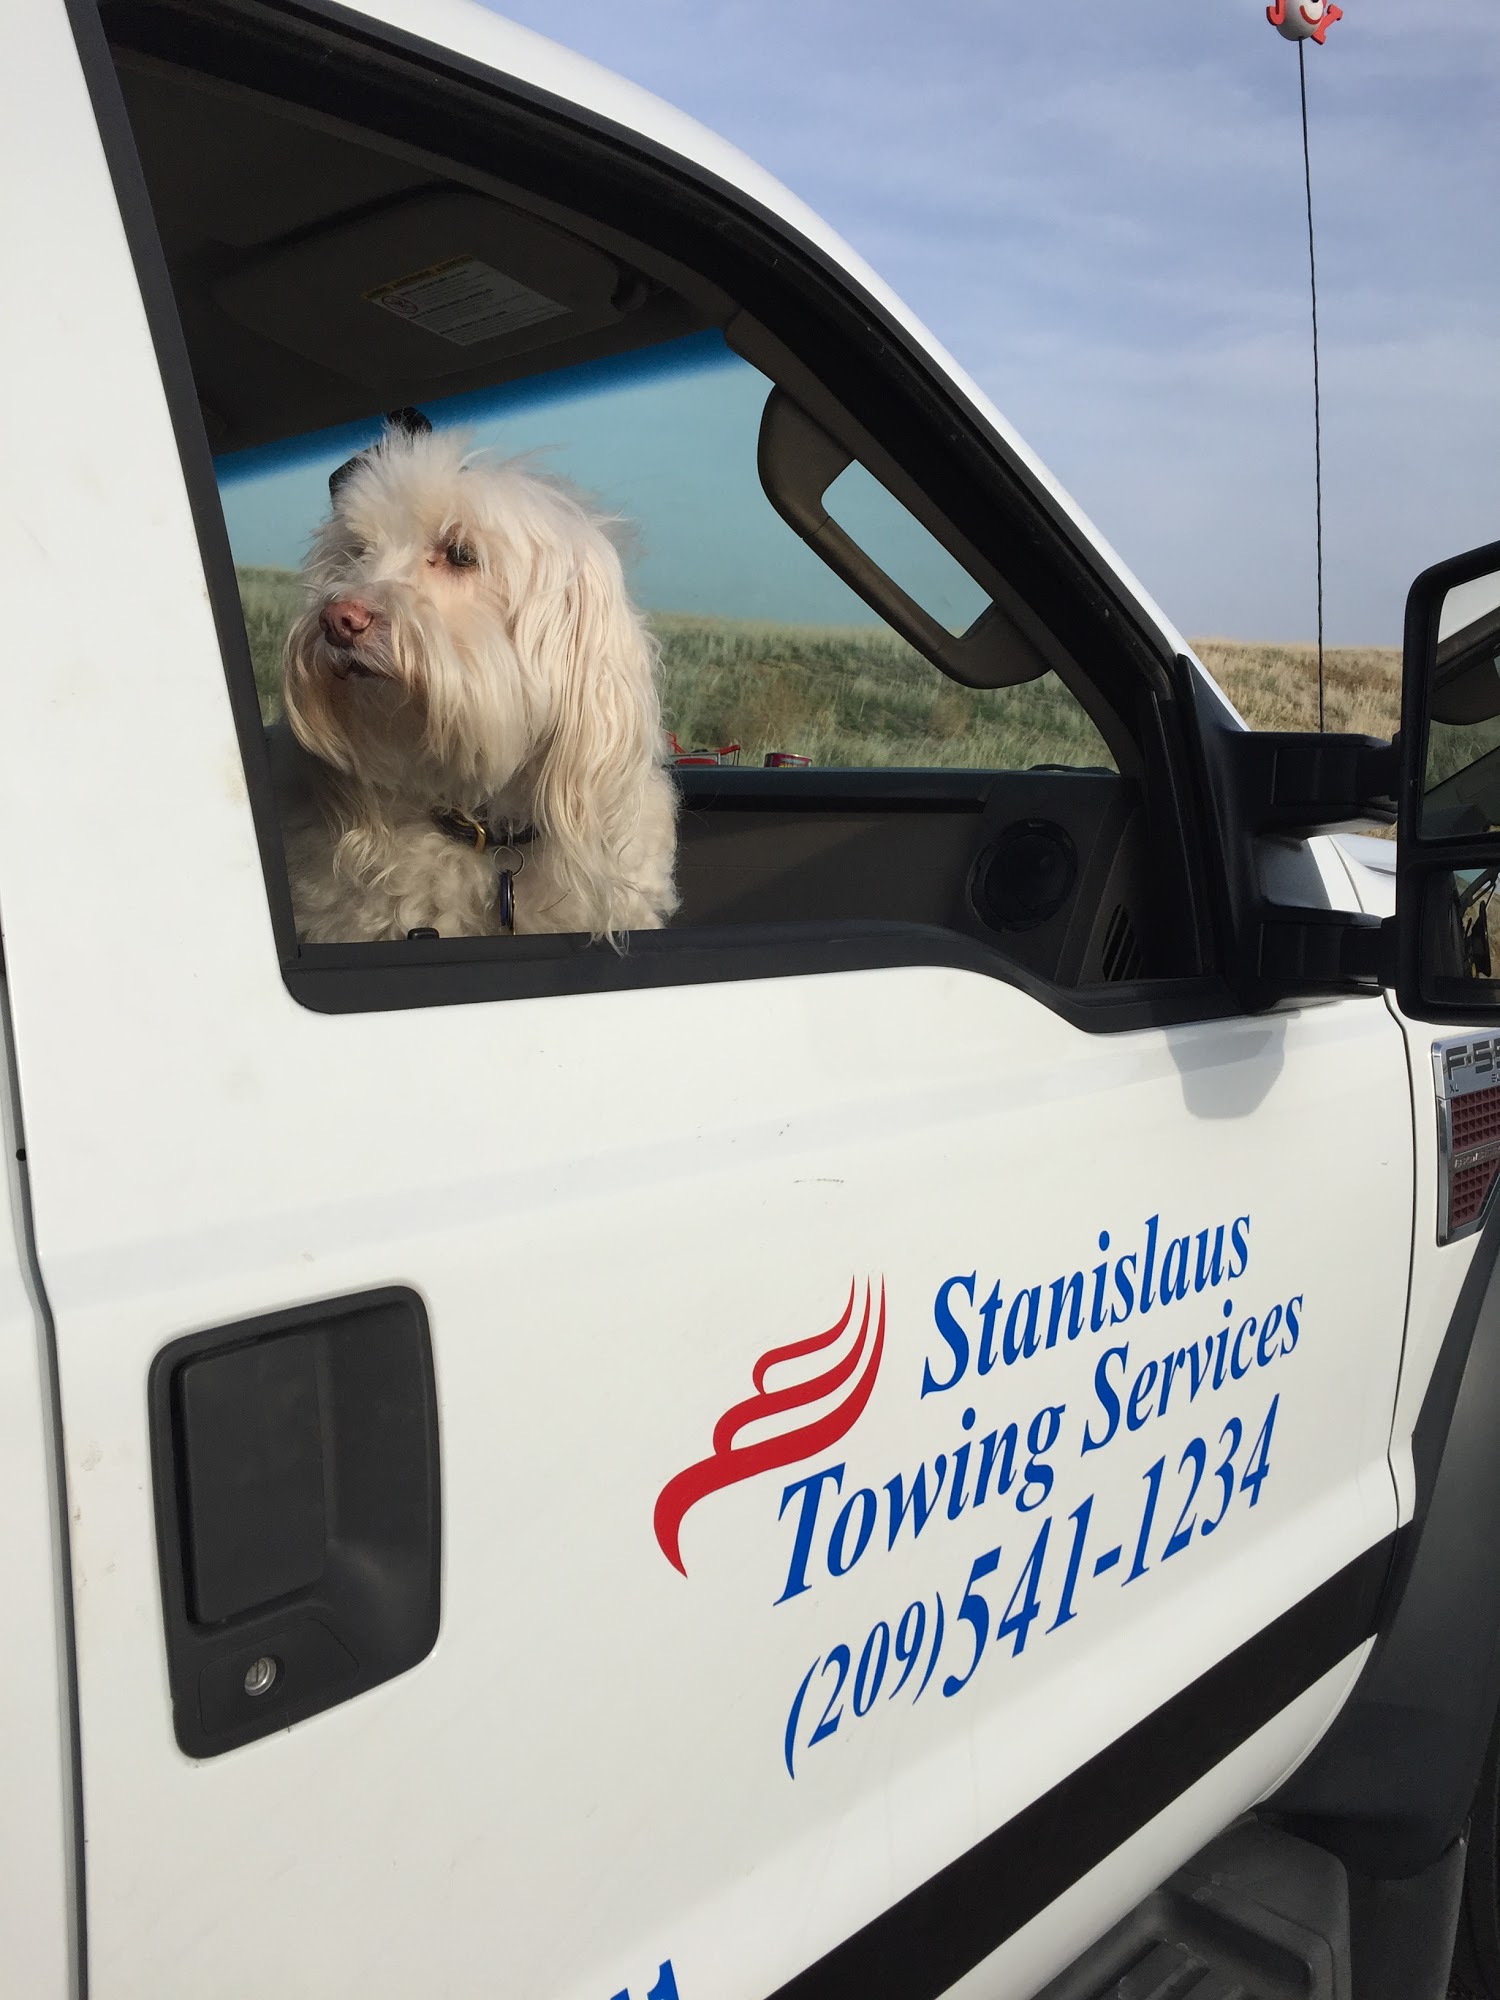 Stanislaus Towing Services